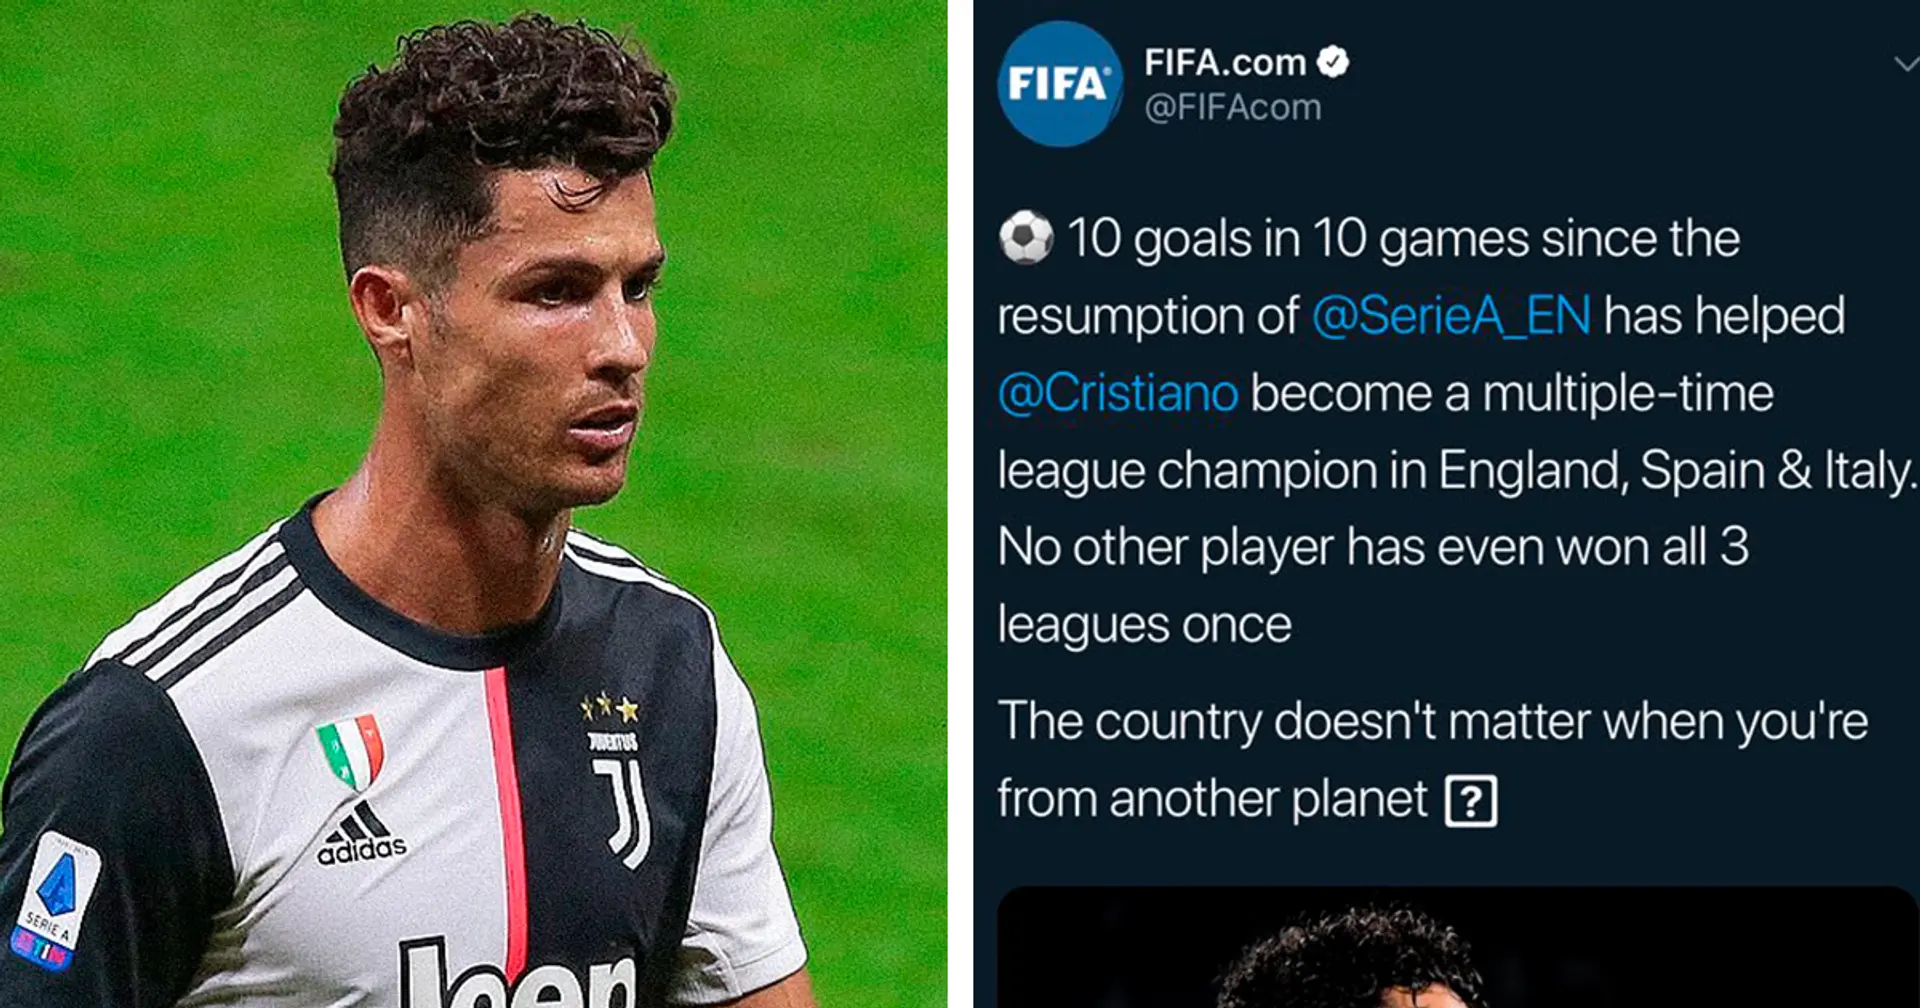 Cristiano Ronaldo isn't only player to have won Premier League, La Liga and Serie A - despite FIFA's hasty claim